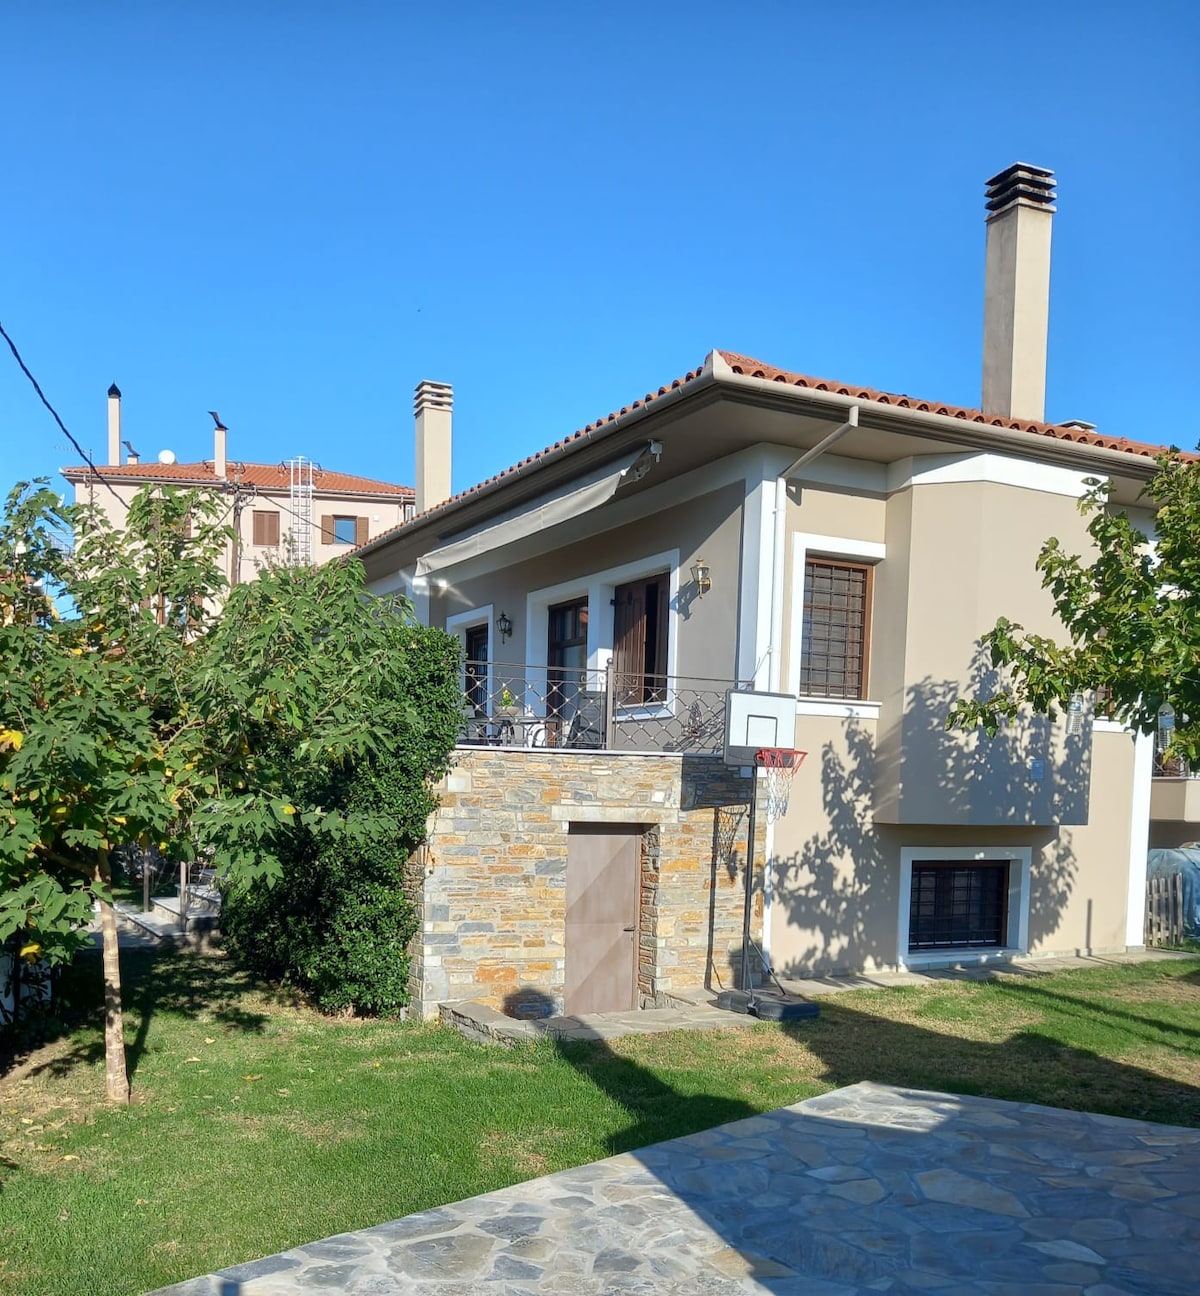 The Villea Cottage - 5 bed house in Alli Meria